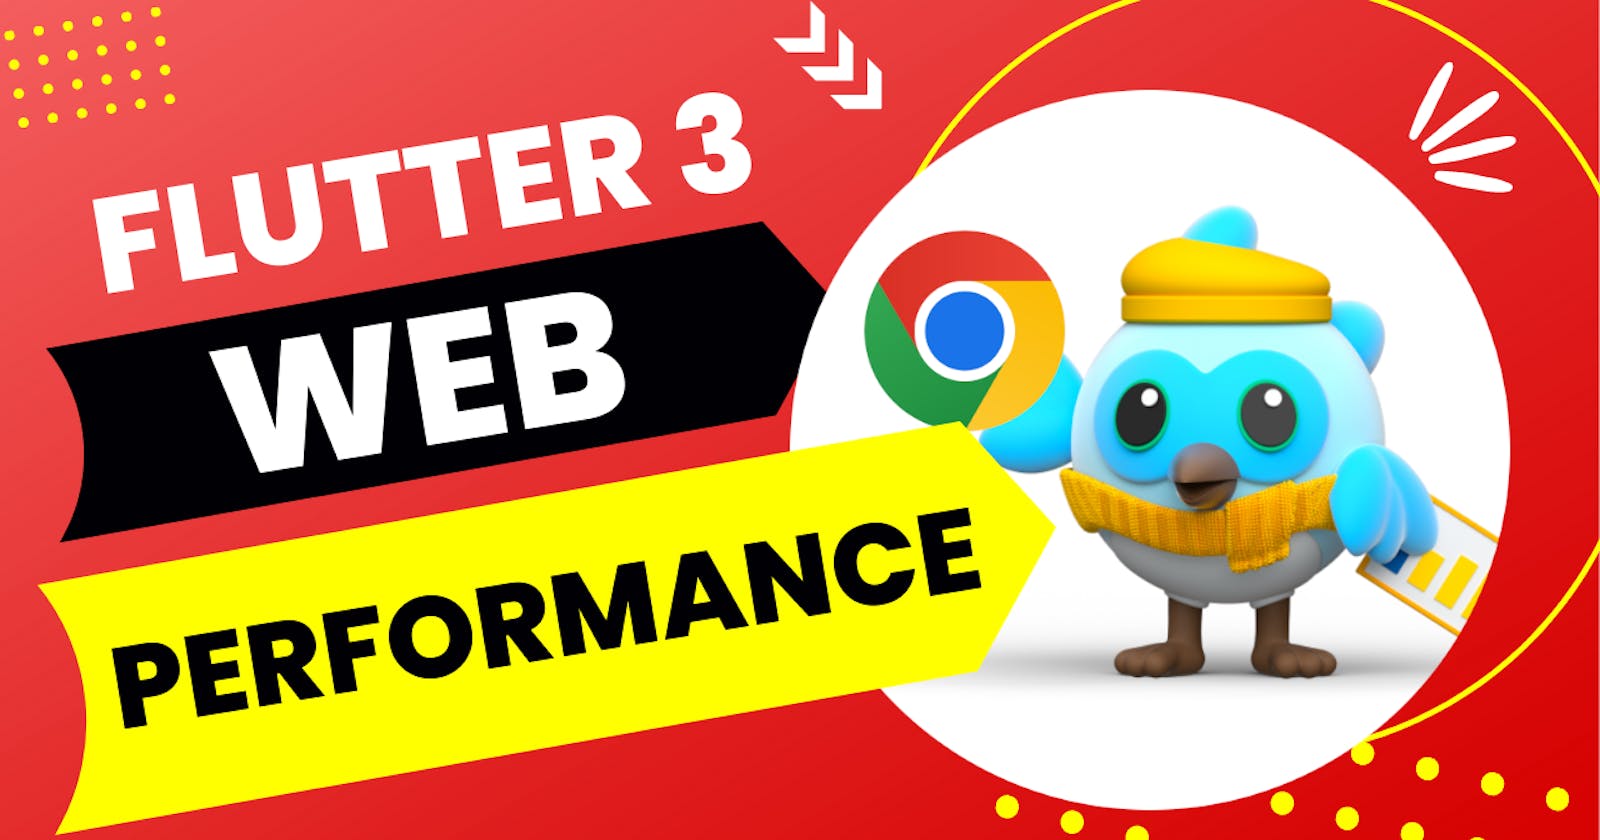 Flutter 3 for WEB: have they really managed to increase performance?